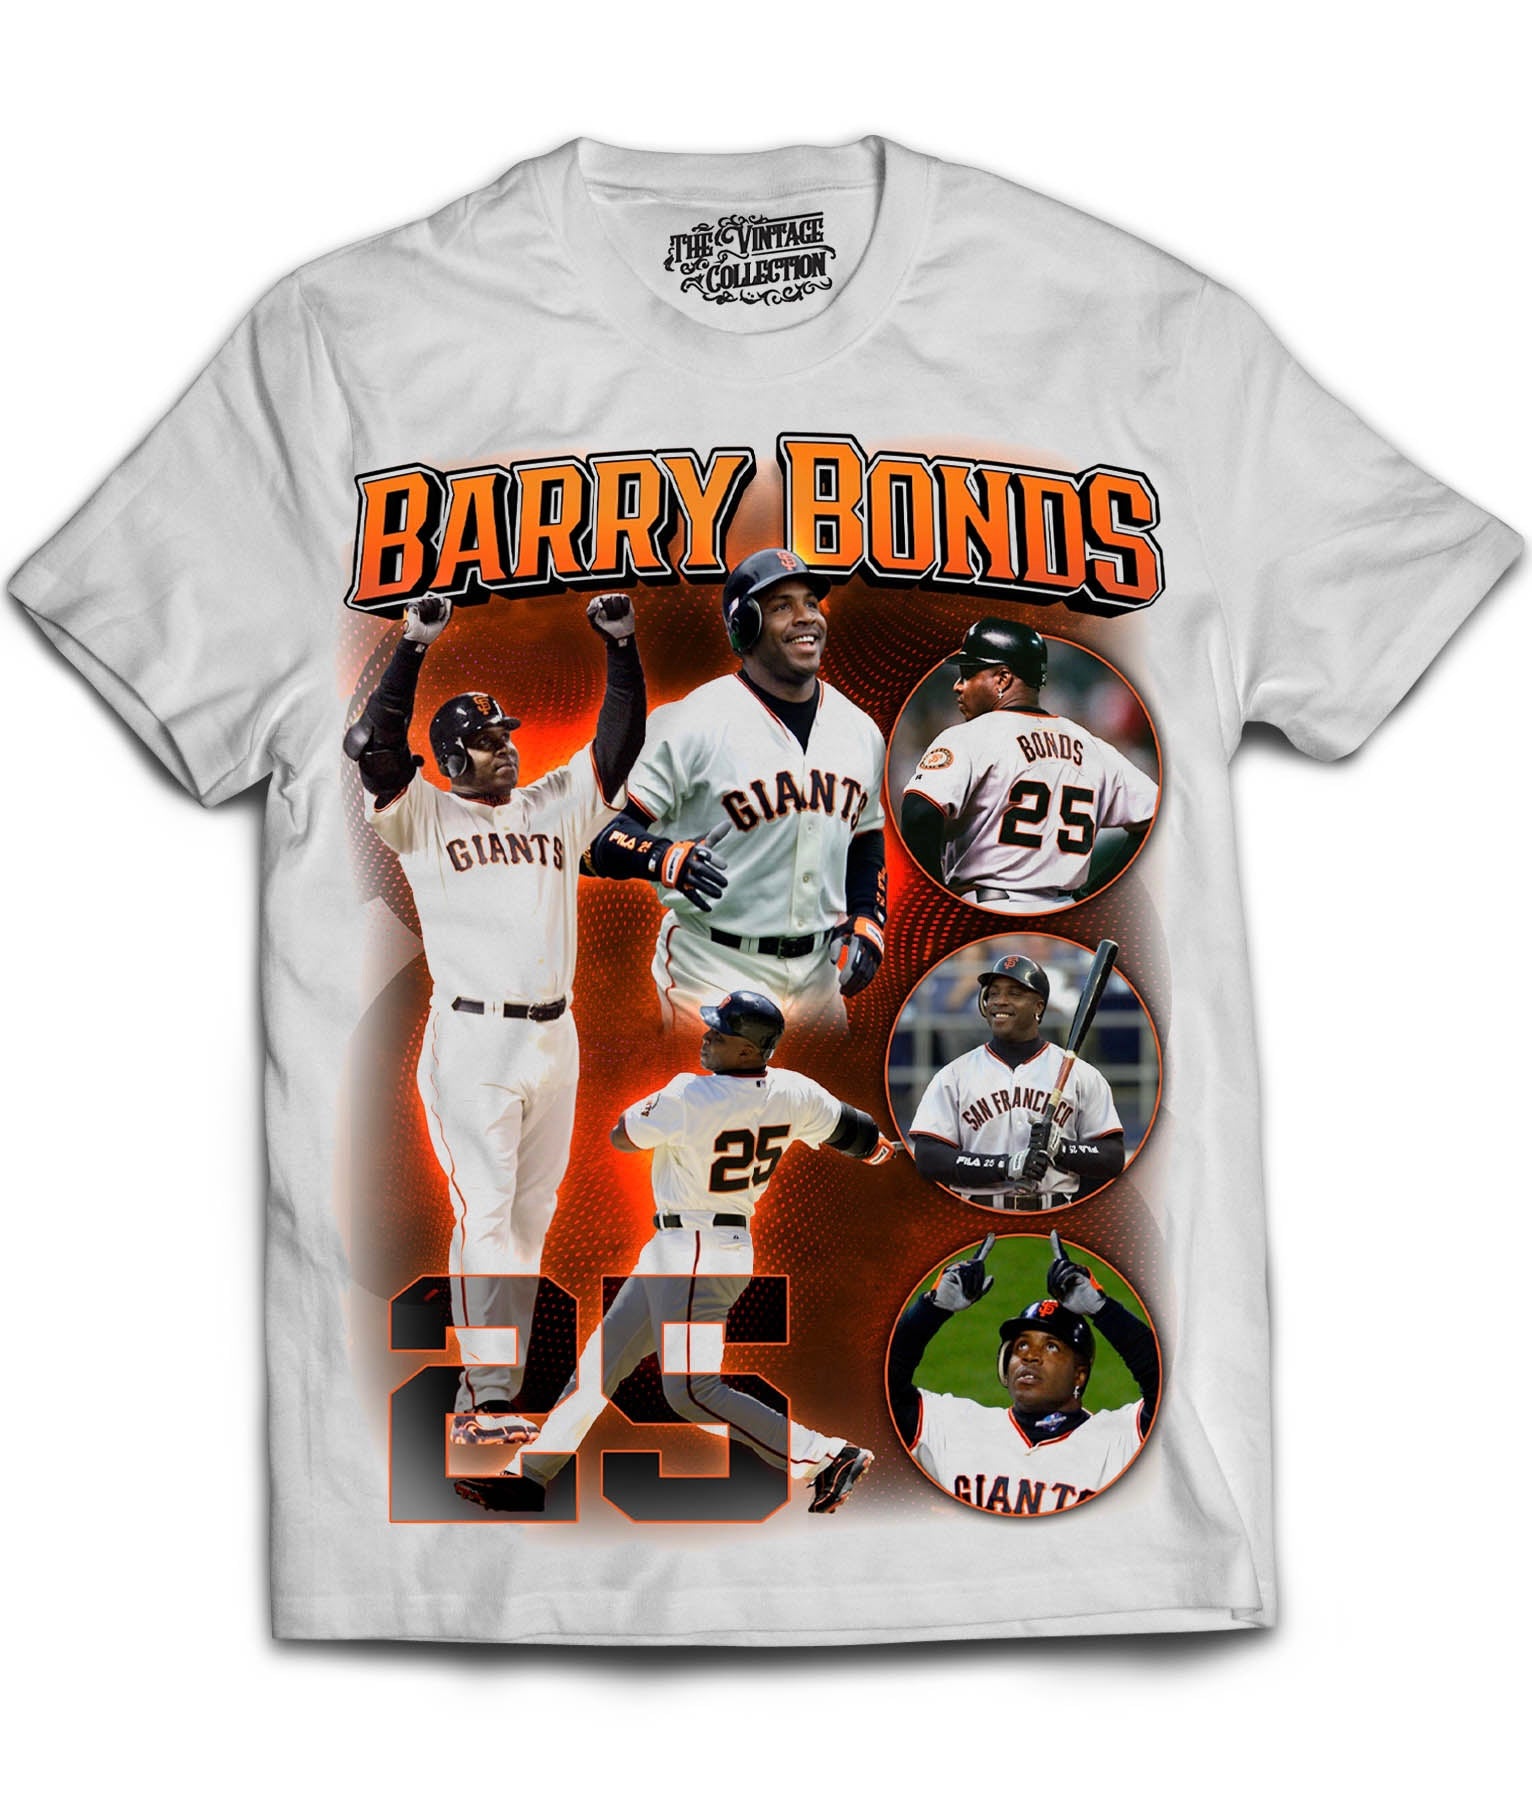 Barry Bonds Tribute T-Shirt (WHITE) – The Vintage Collection